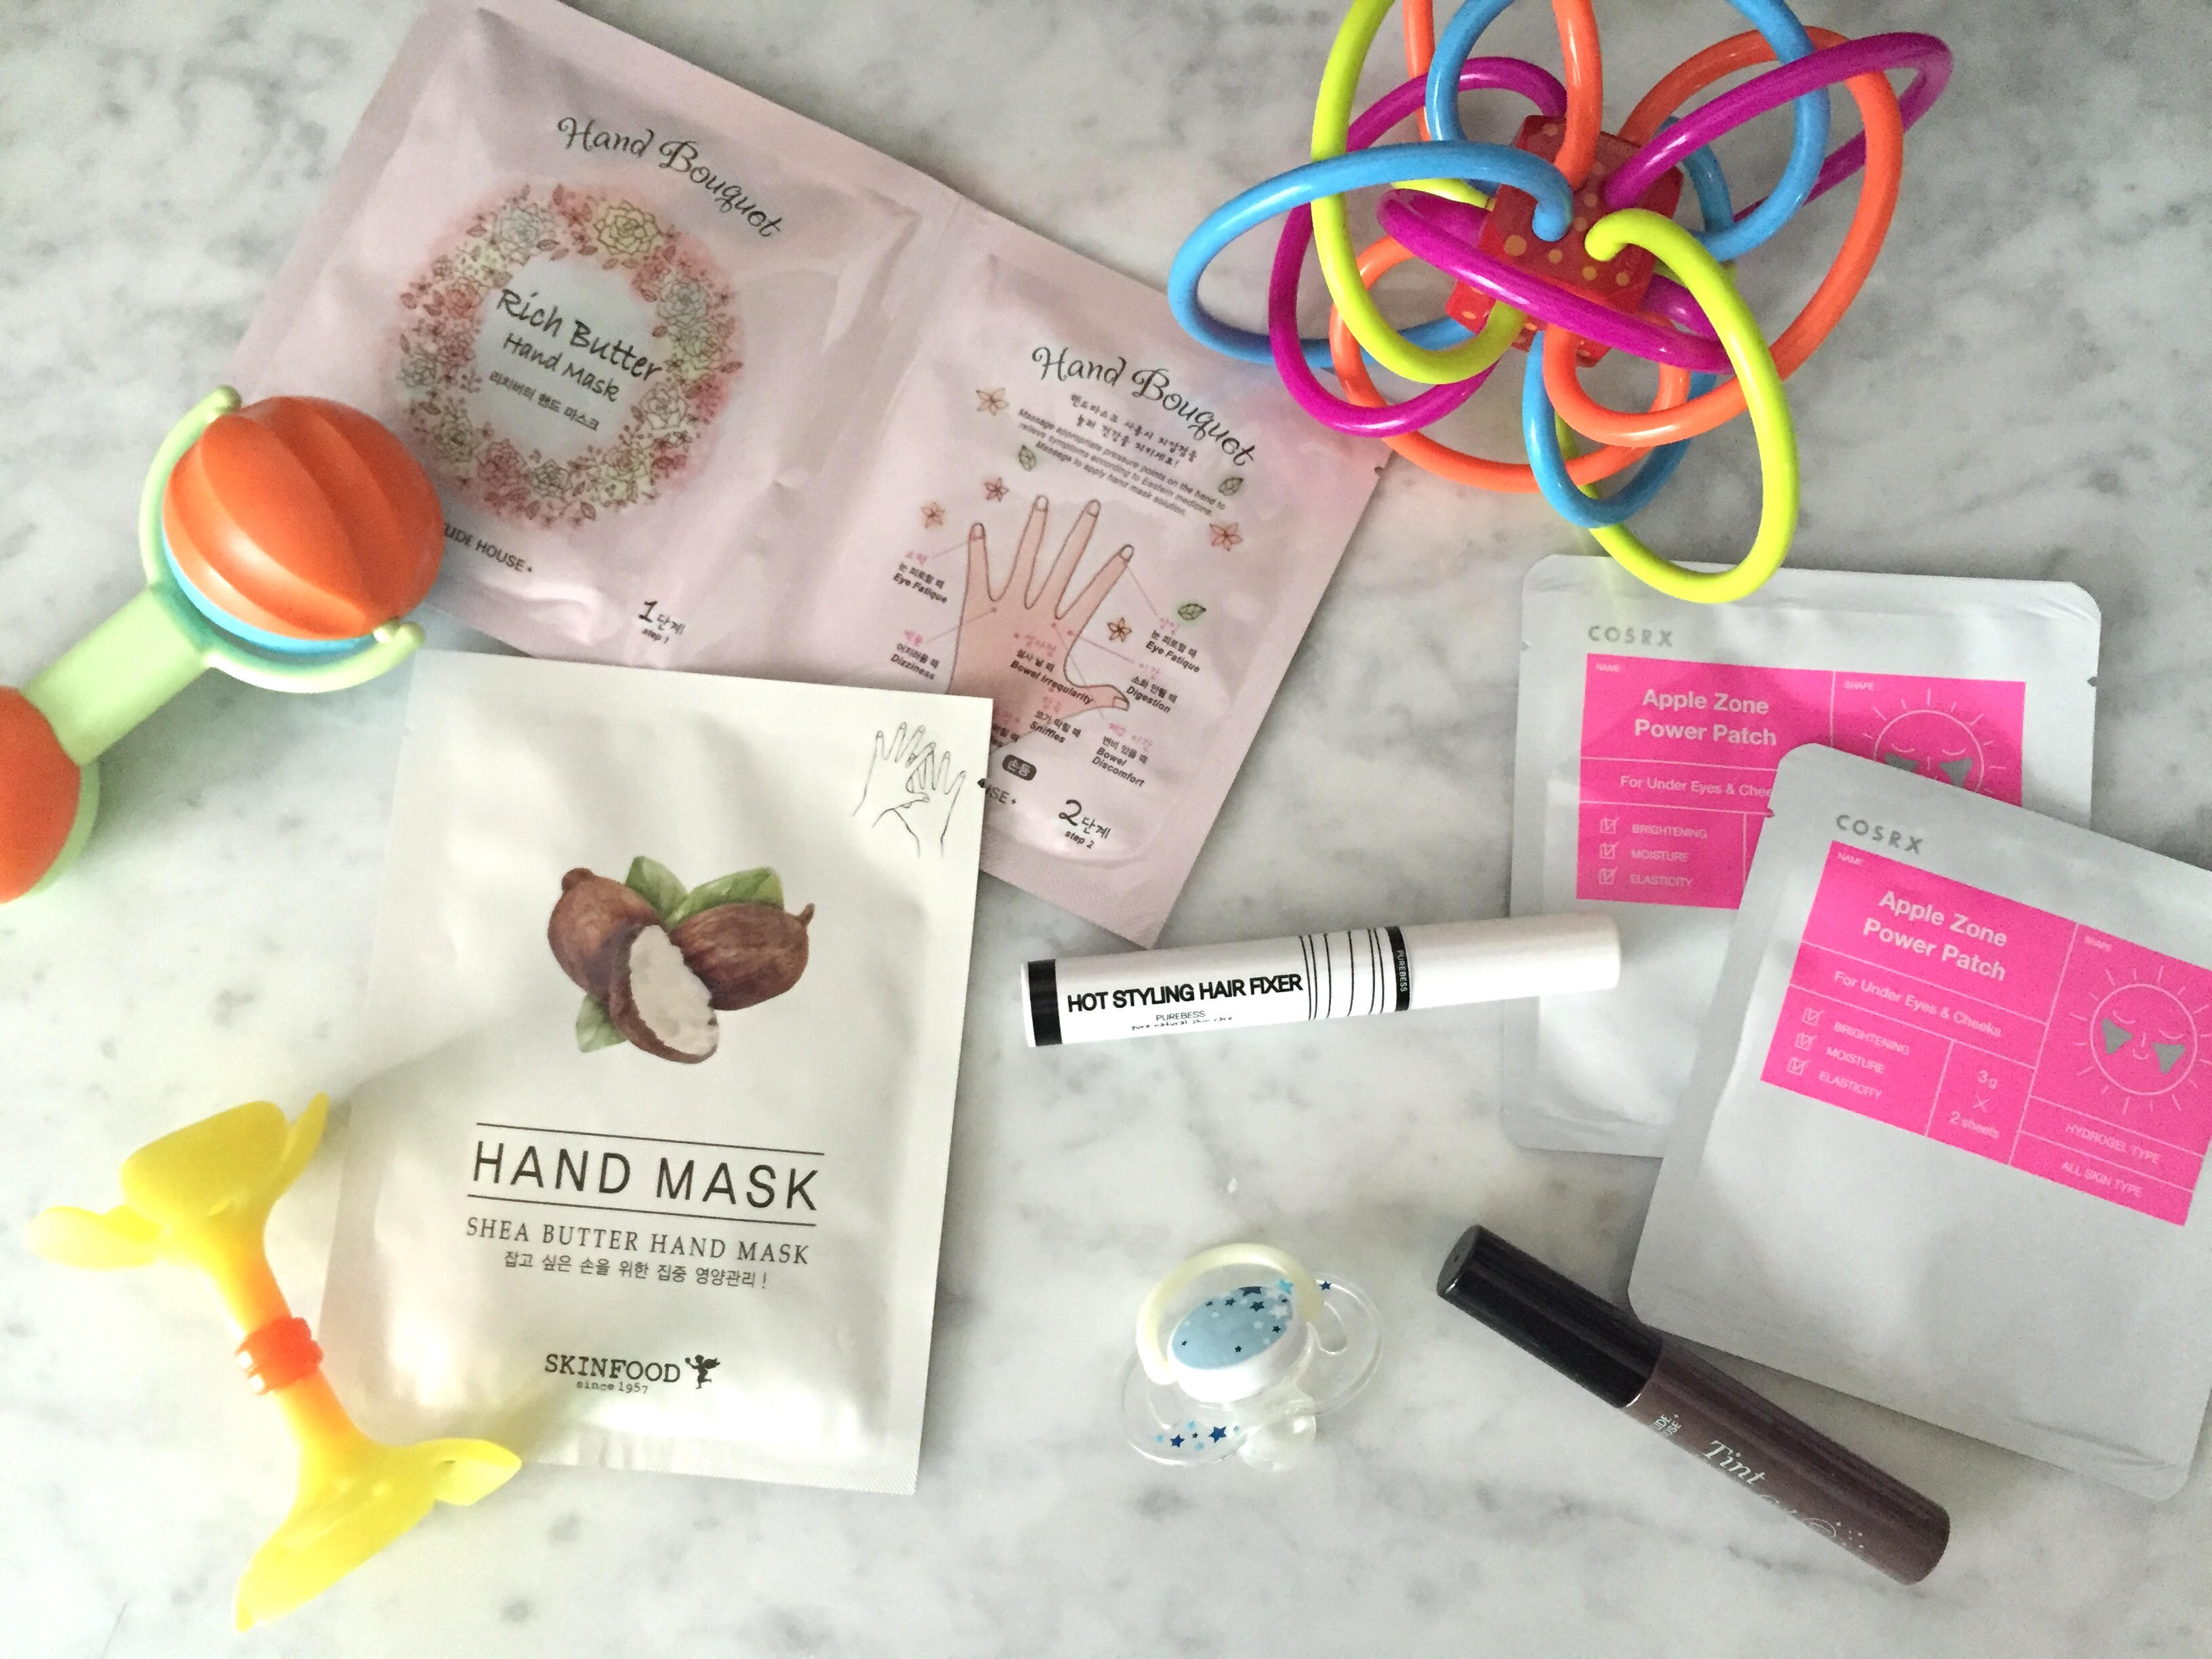 How to Patch & Test Your Cosmetic Products, Seoul Mamas